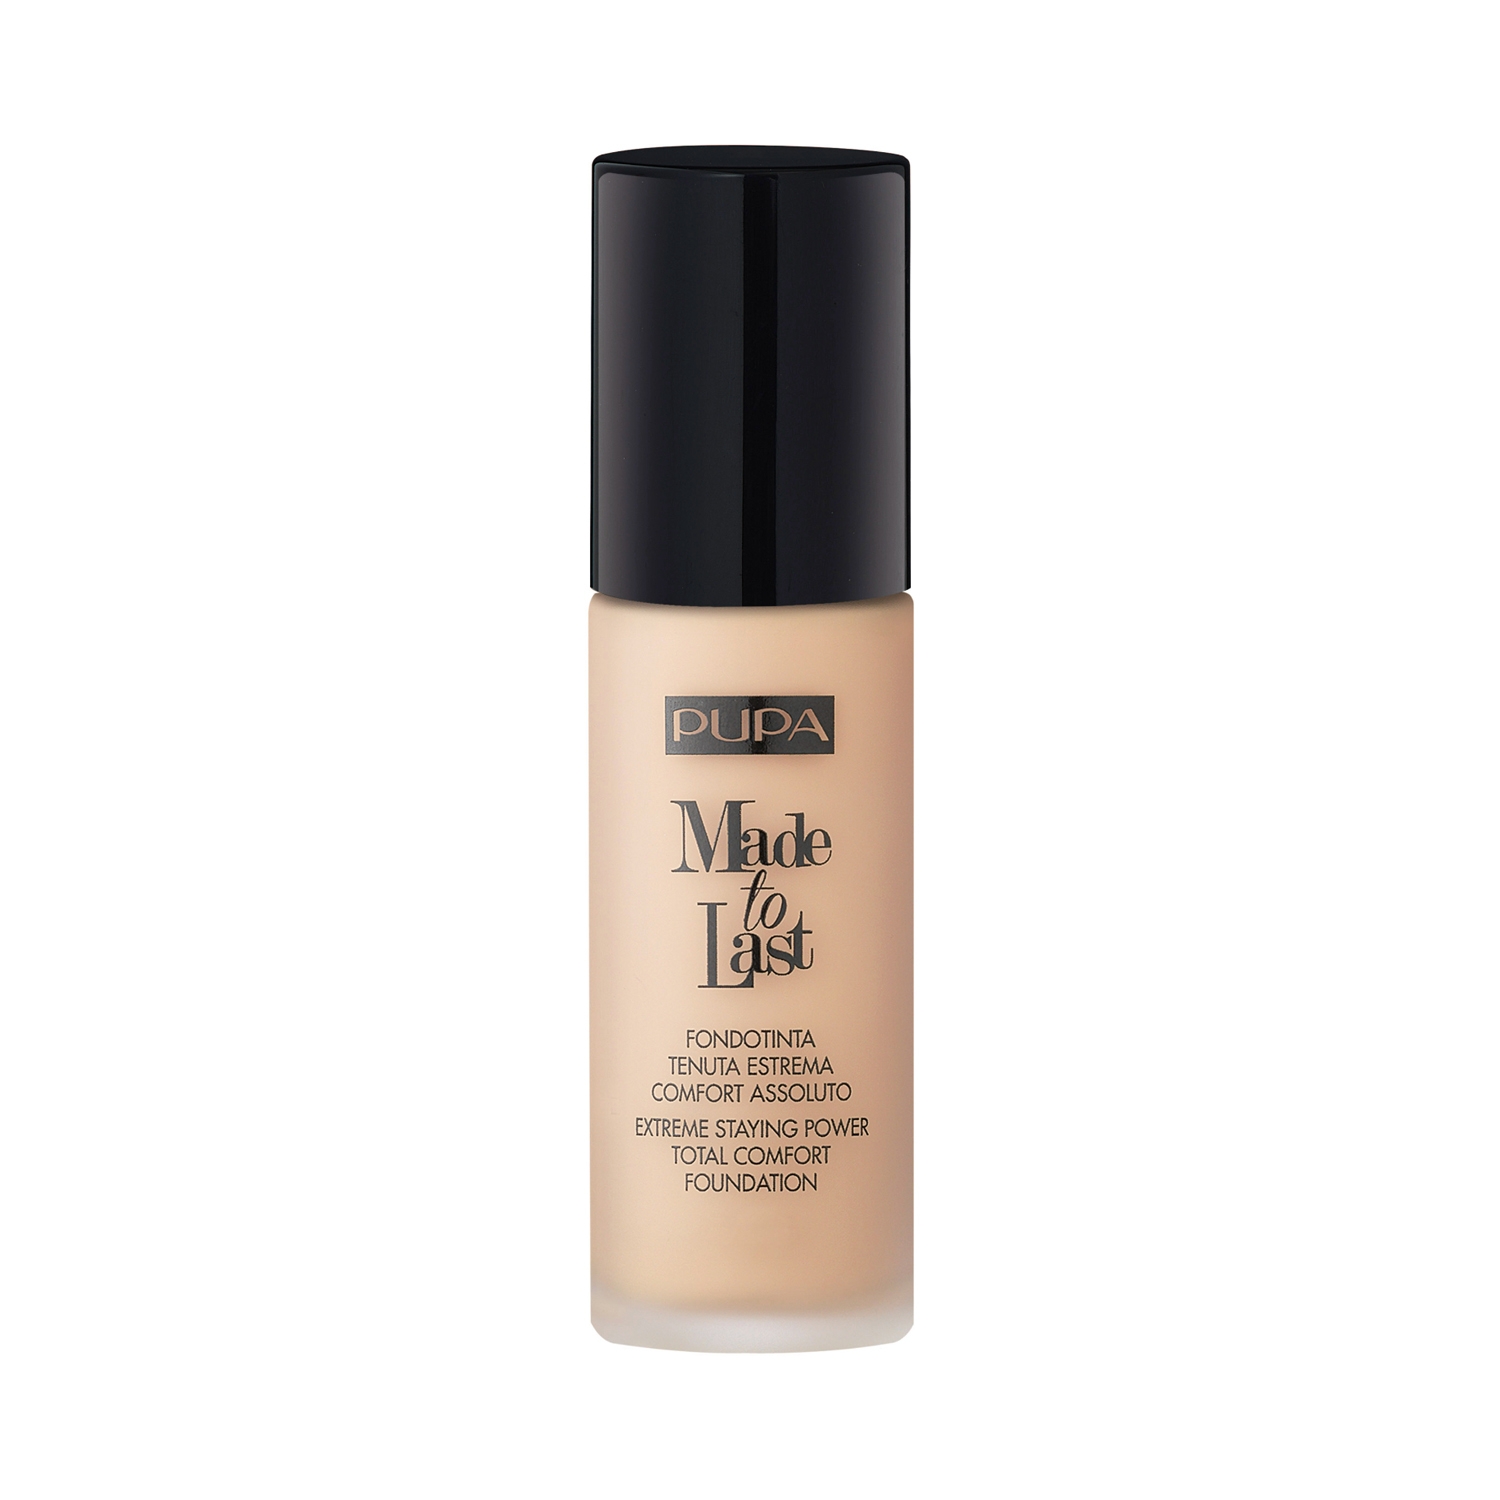 Pupa Milano Made To Last Extreme Staying Power Total Comfort Foundation SPF 10 - 050 Sand Beige (30ml)